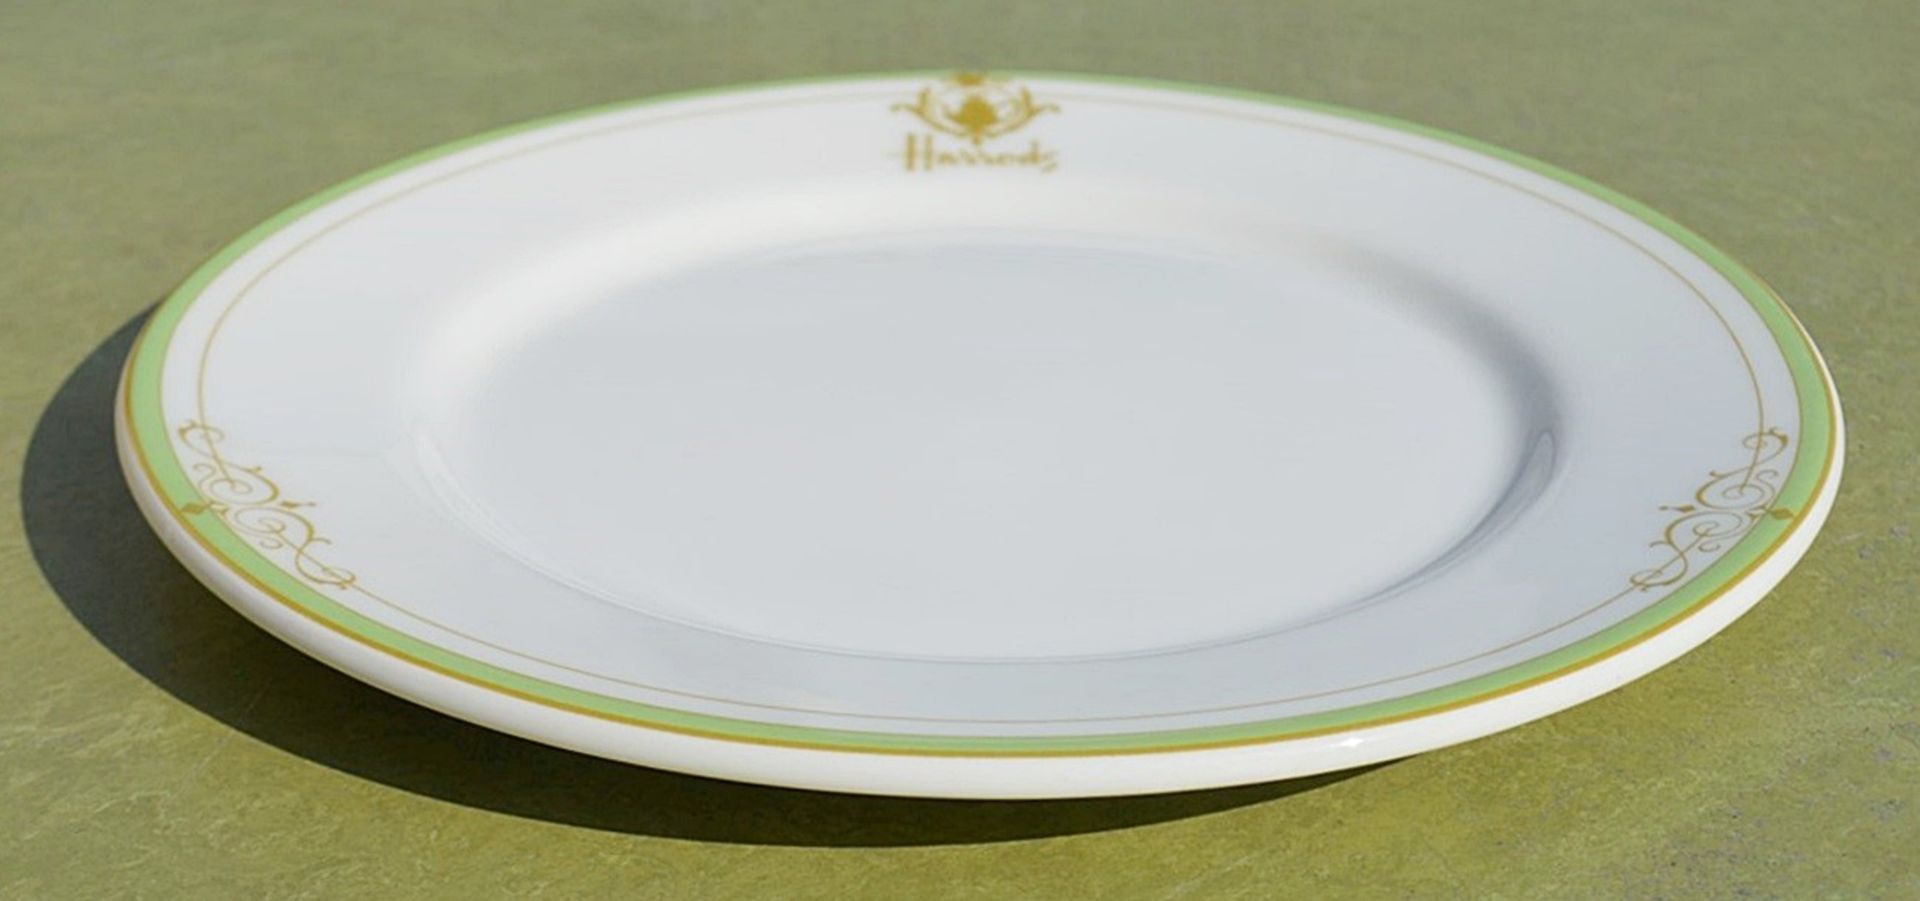 36 x DUDSON Fine China 'Georgian' 16.2cm Tea Plates With 'Famous Branding' (2IWP210G) - Recently - Image 3 of 5